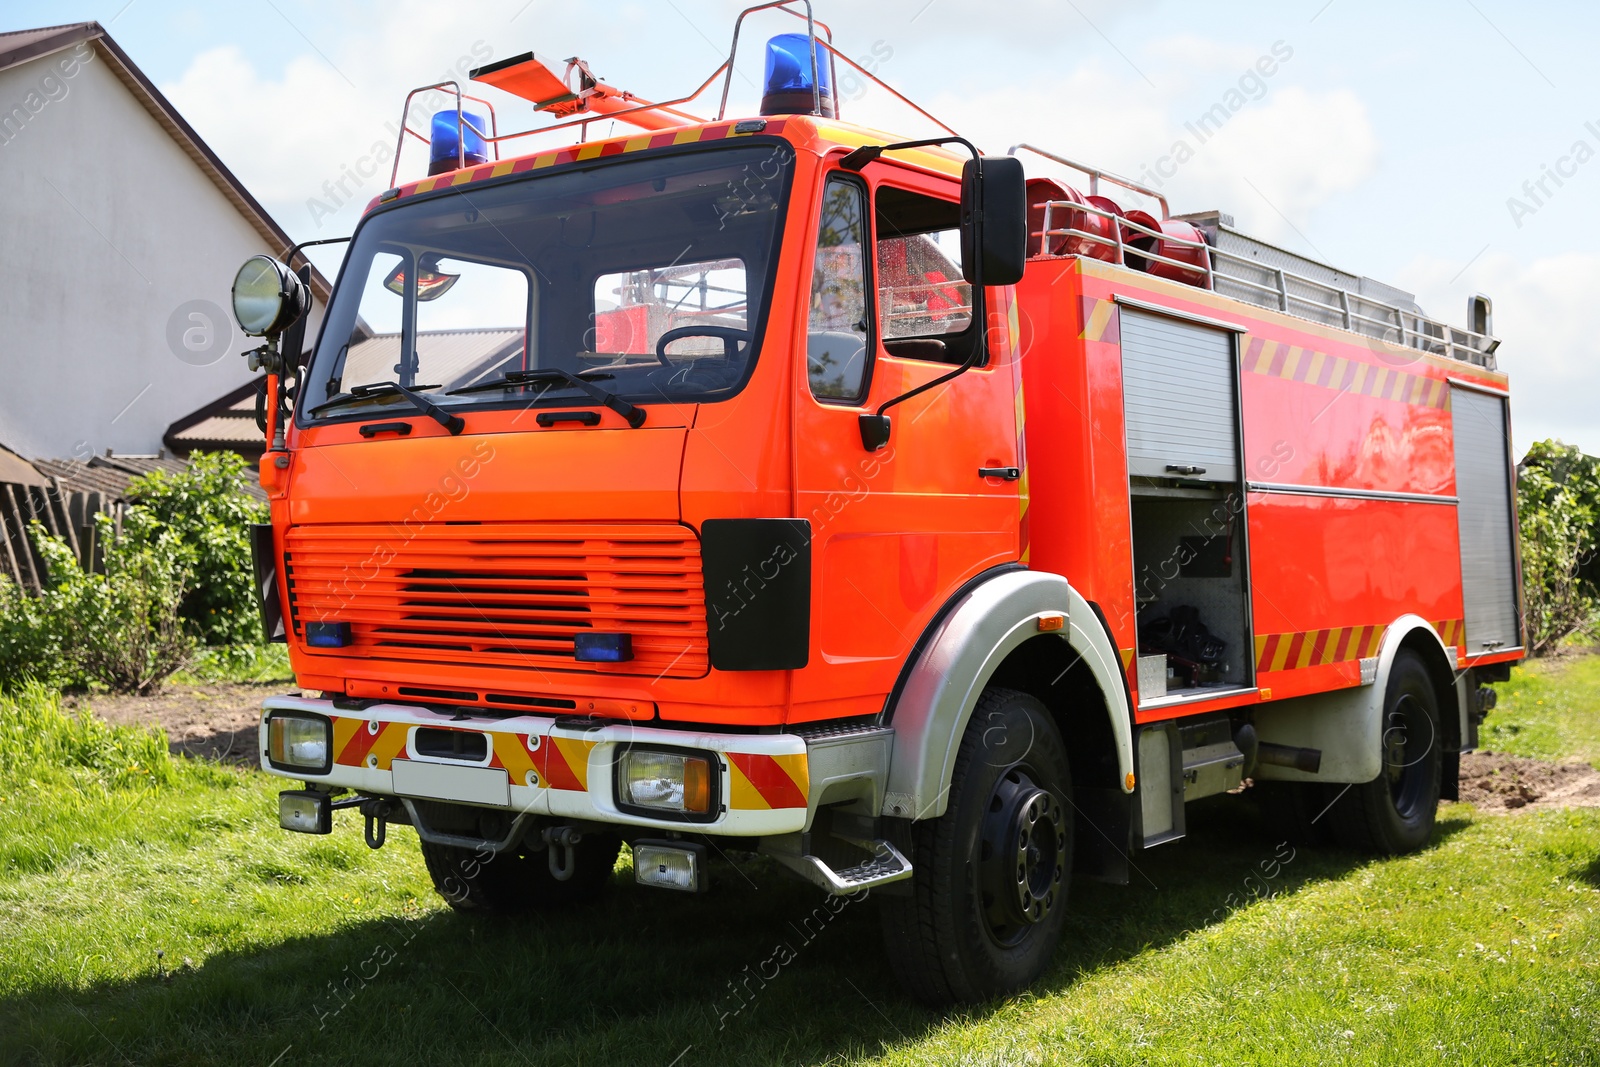 Photo of One modern orange fire truck on sunny day